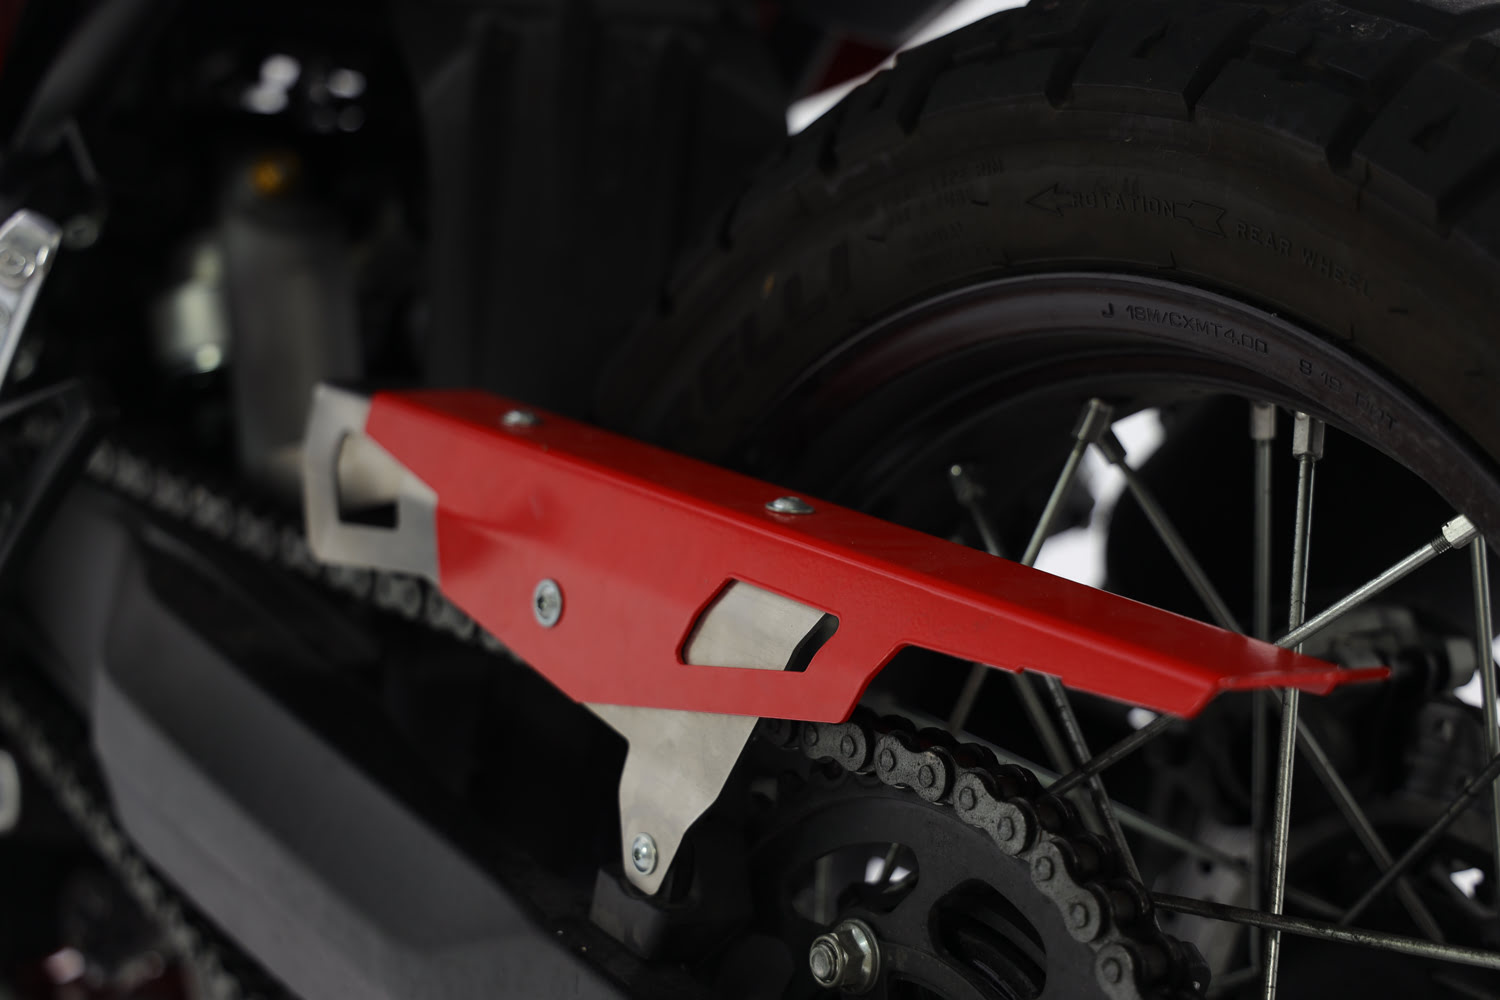 Chain Guard Brushed stainless steel / Red